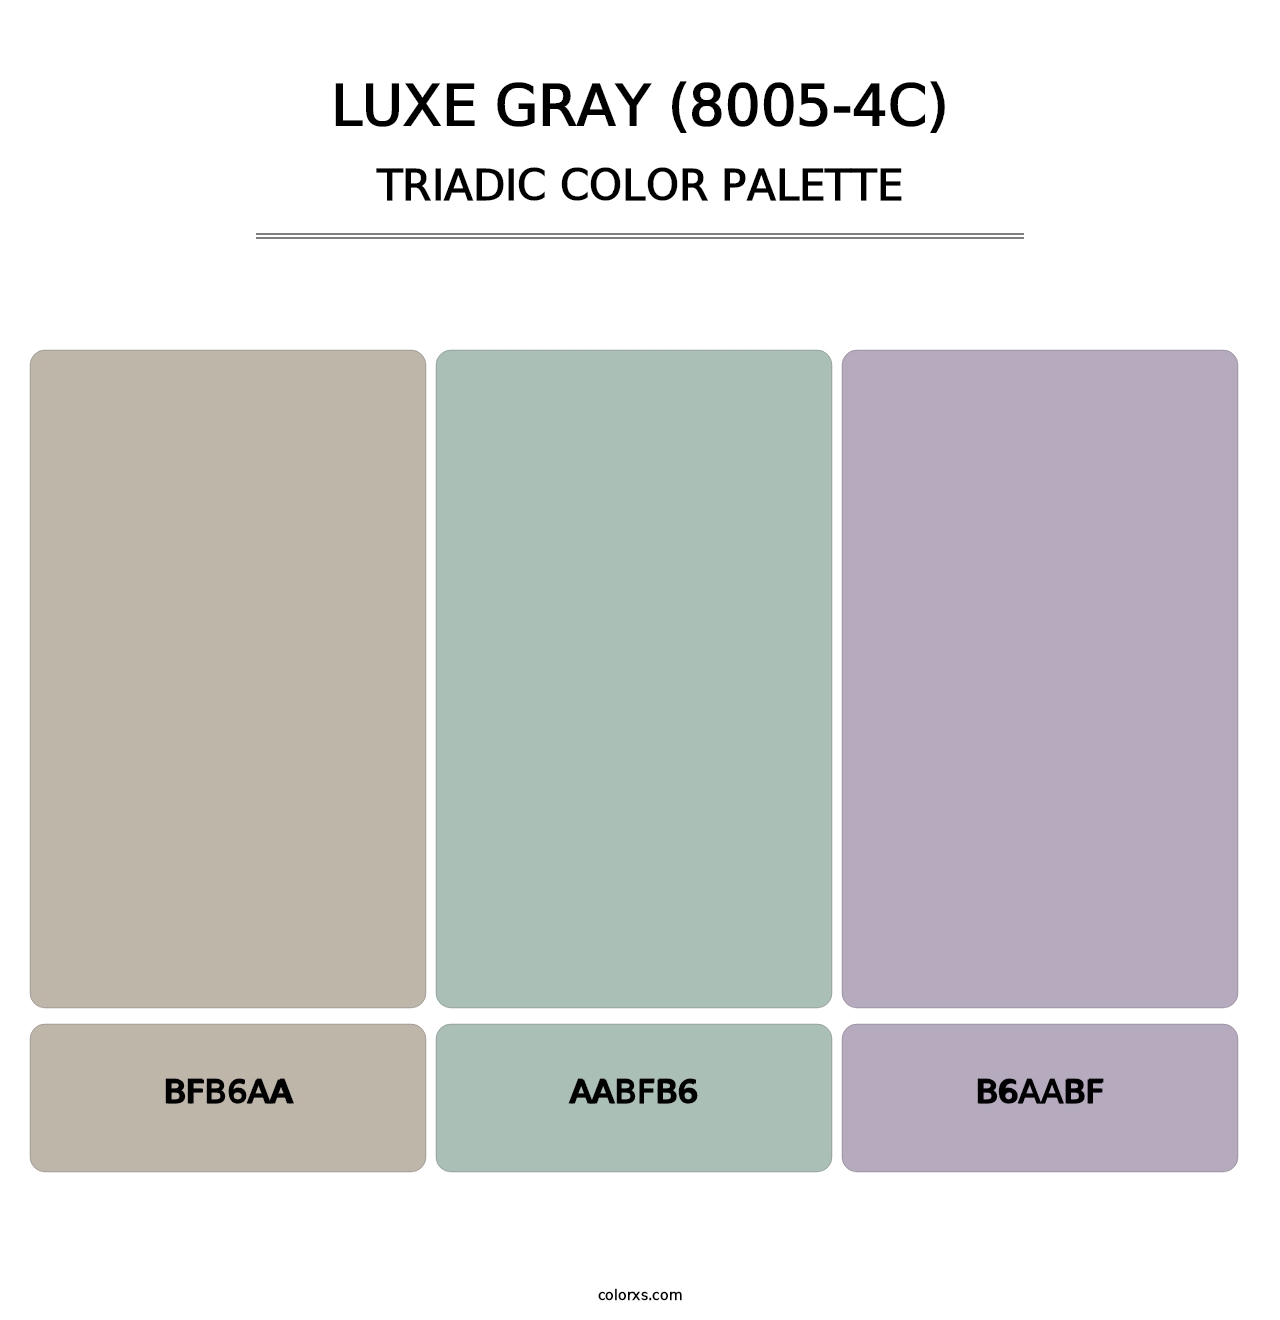 Luxe Gray (8005-4C) - Triadic Color Palette